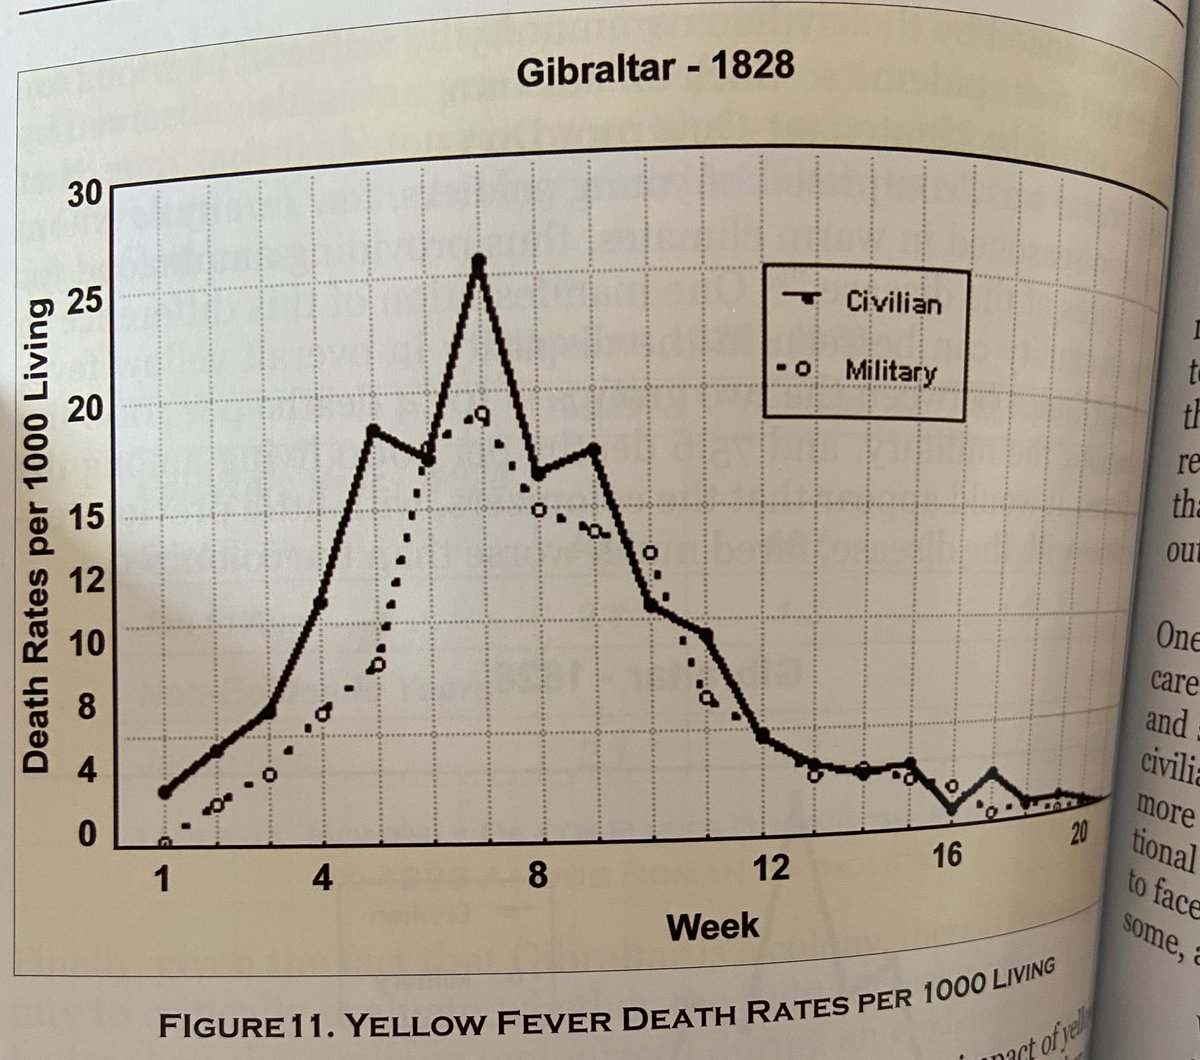 Weekly DistributionGib saw a peak in deaths at Week 7 of the 1928 epidemic. Approx 270 deaths were recorded in 1 week. For such a small pop this was extremely devastating. Death rate of 19 per 1,000 living civilians and 26 per 1,000 military personnel at the peak. (8/17)